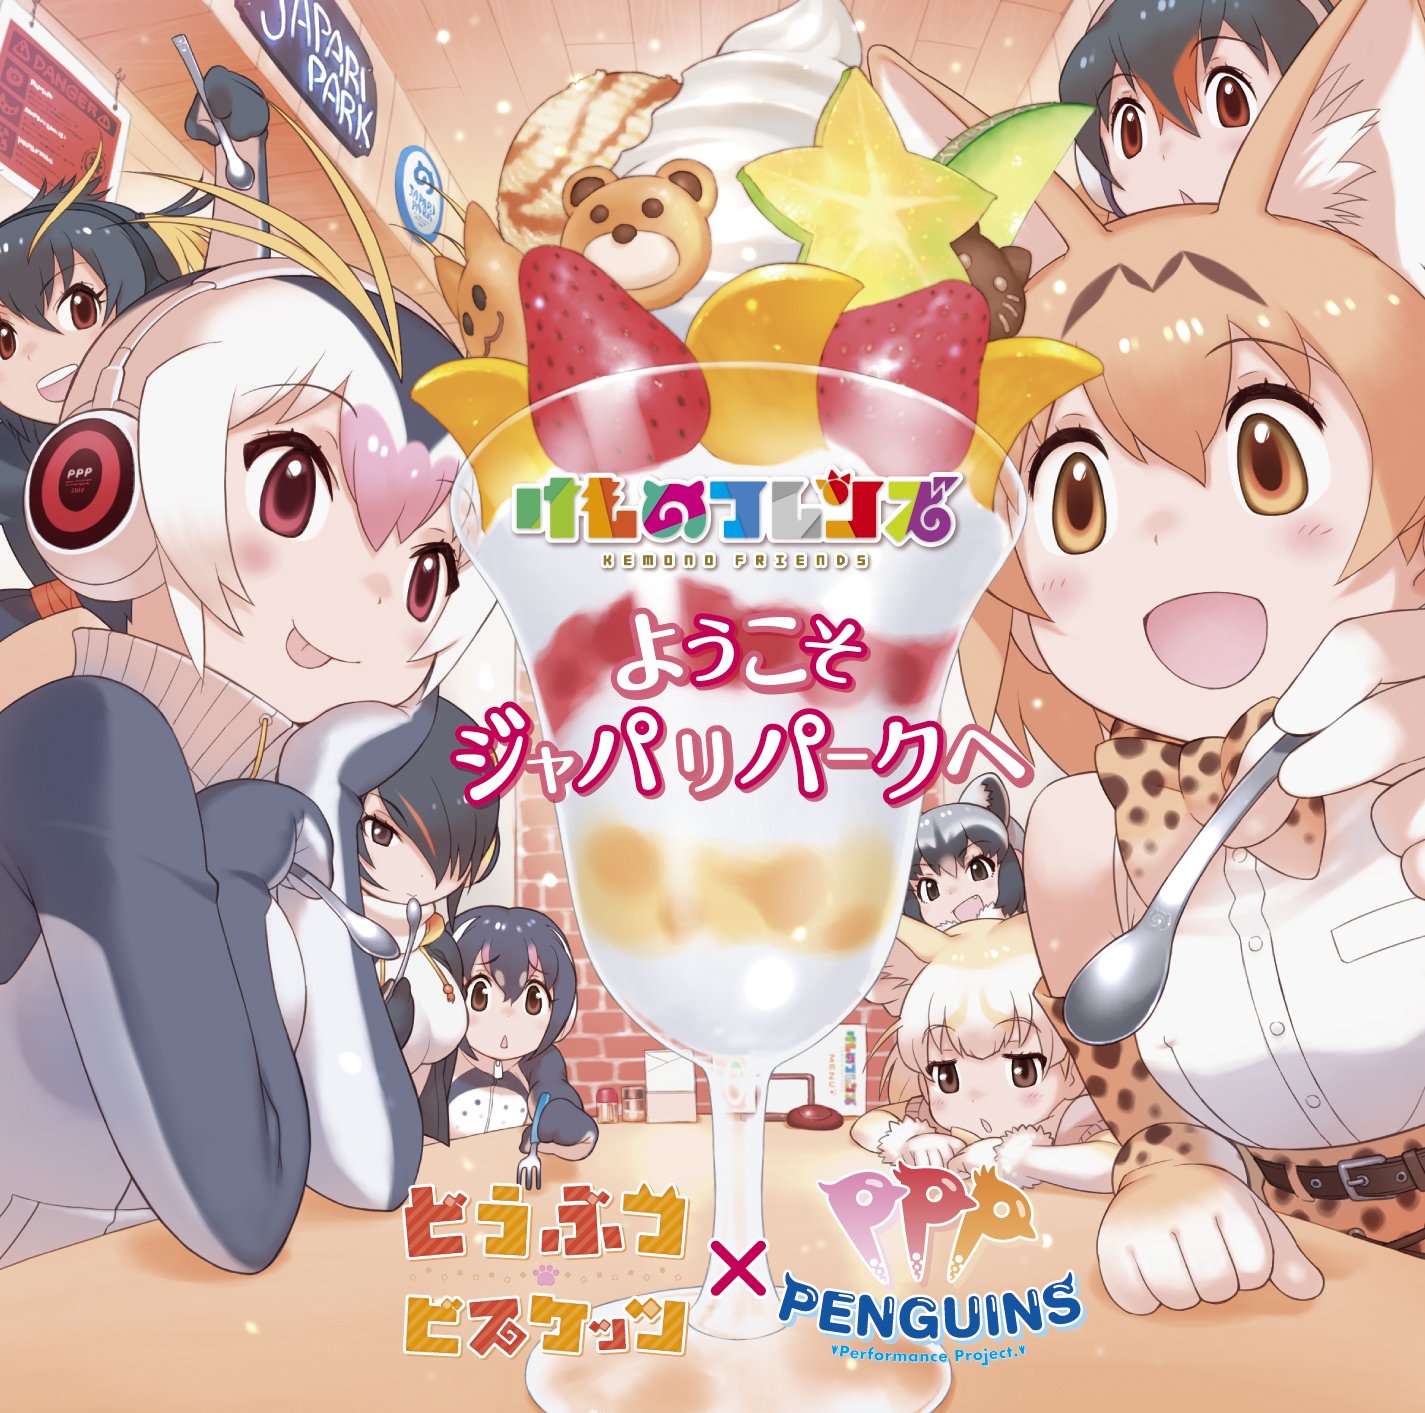 You're My Home - Japari Library, the Kemono Friends Wiki